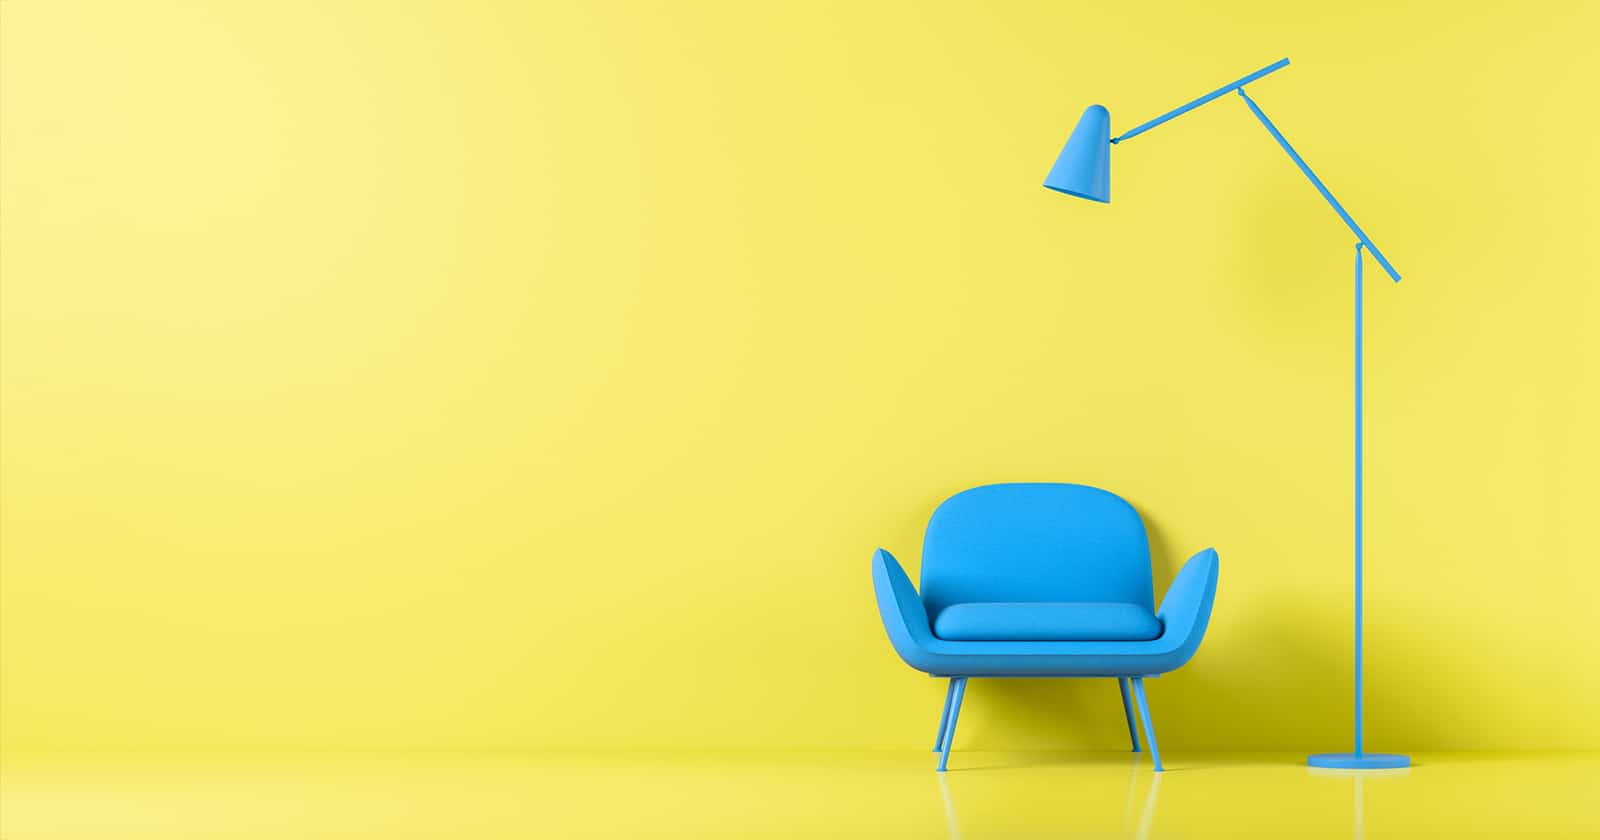 An Agile Focus on Minimalism – empty yellow space with a single blue chair and lamp